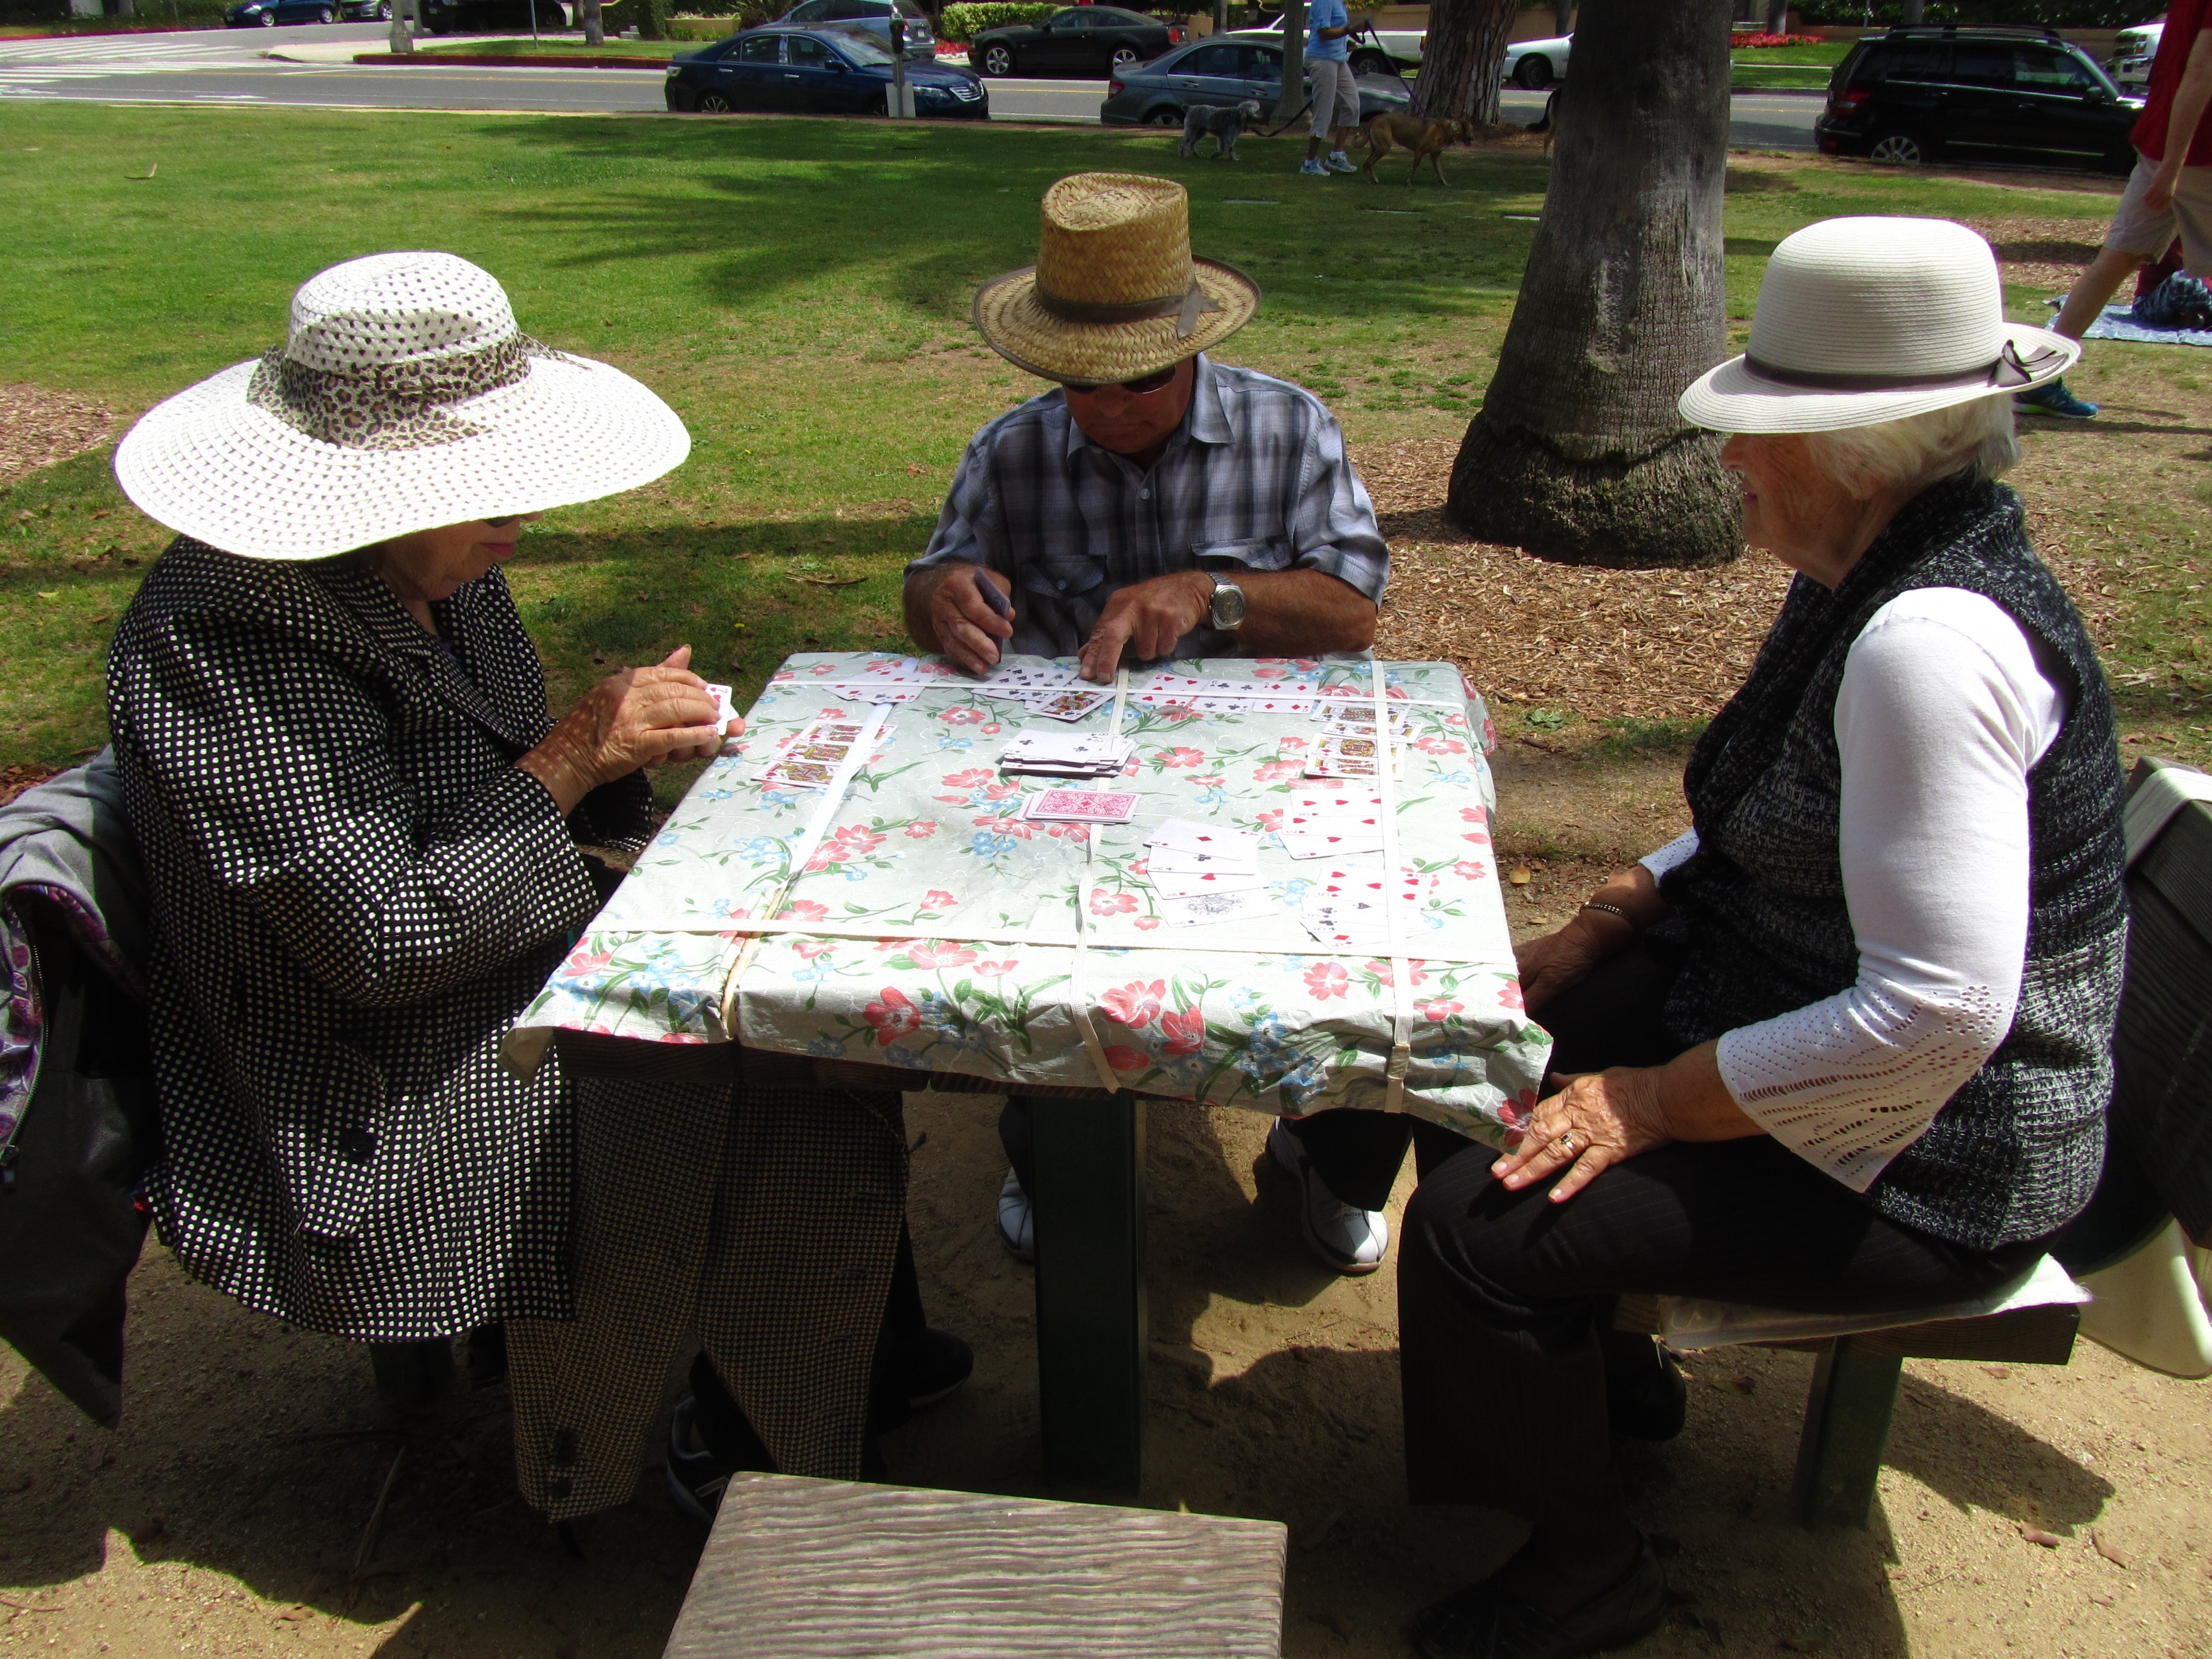 three people sitting on chair playing cards